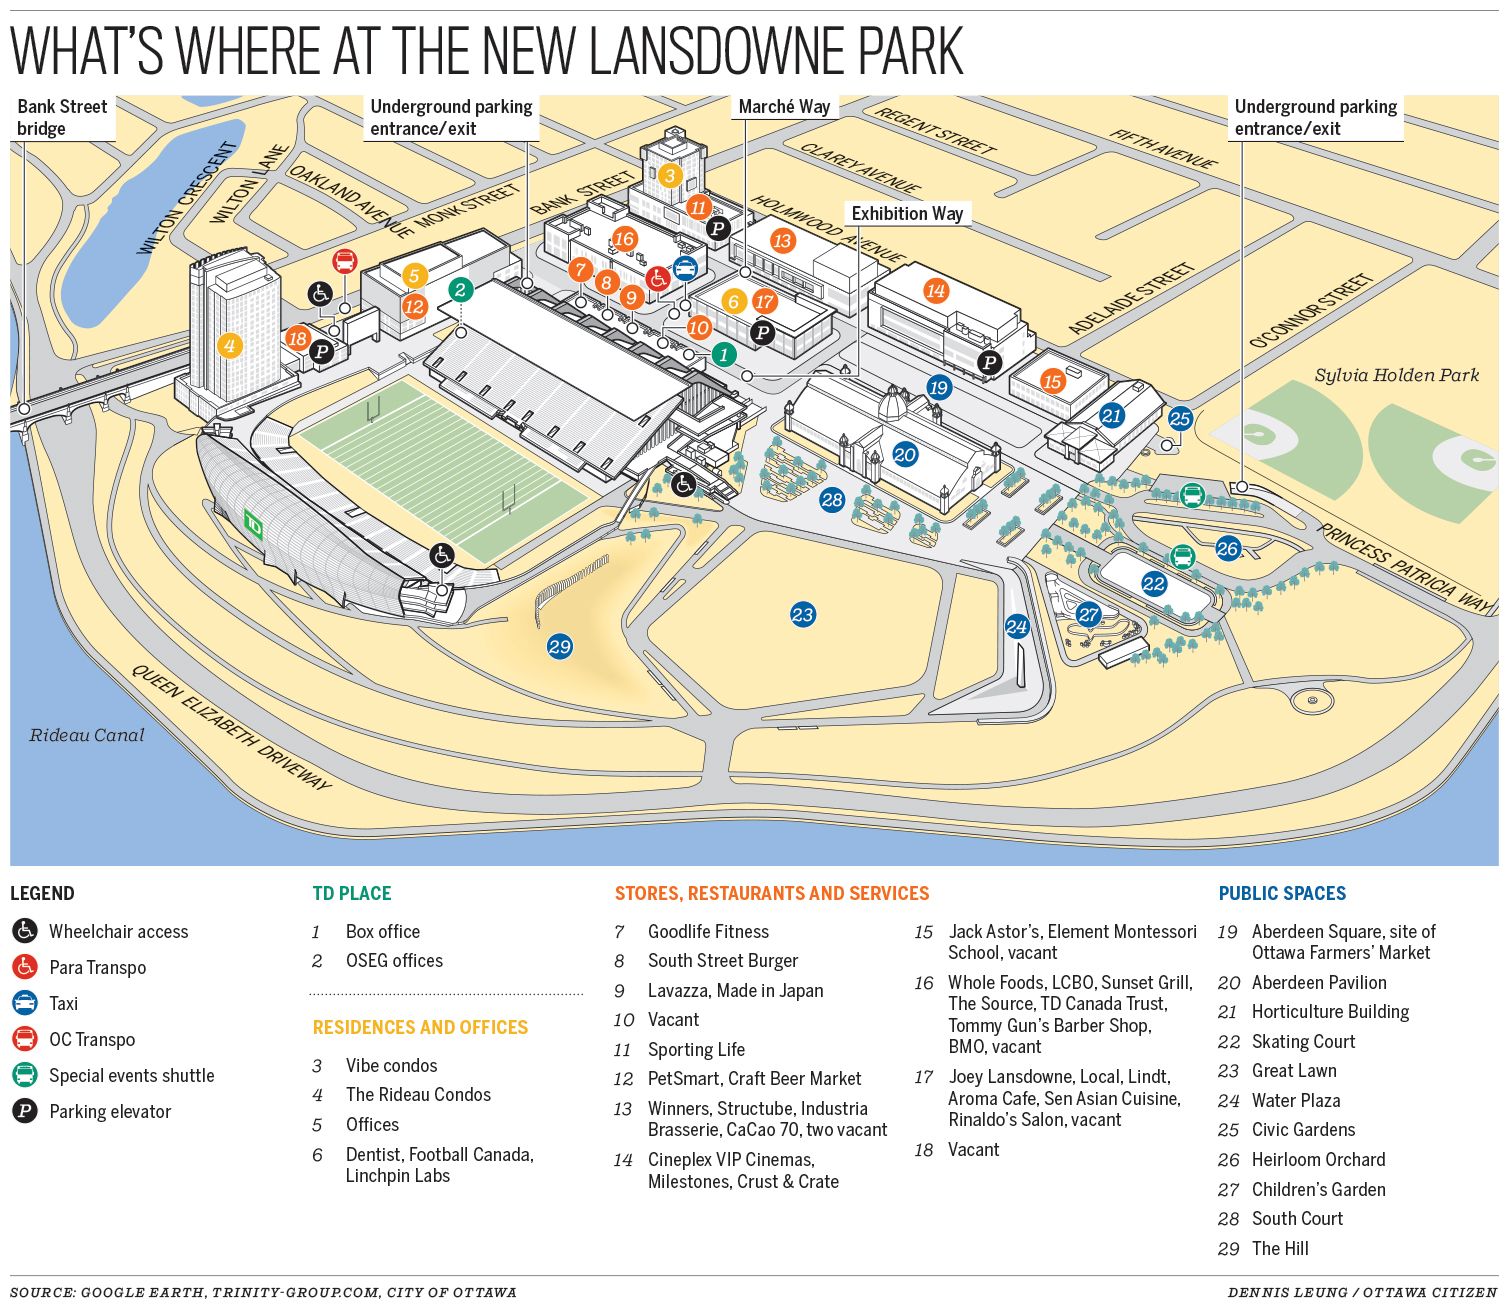 What's where at the new Lansdowne Park